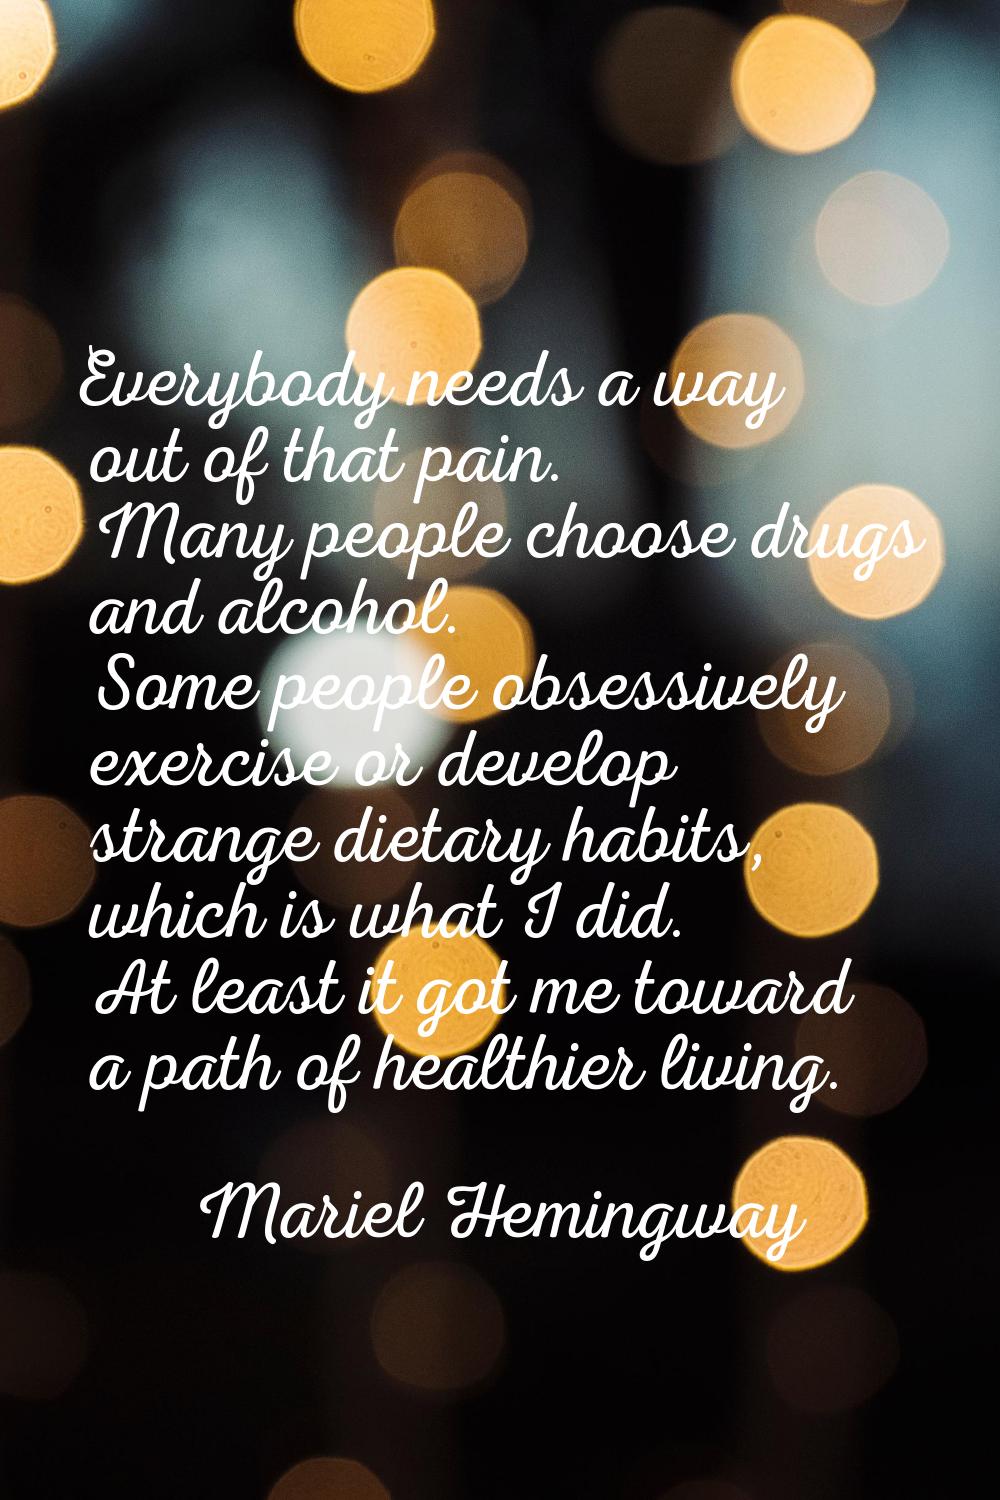 Everybody needs a way out of that pain. Many people choose drugs and alcohol. Some people obsessive